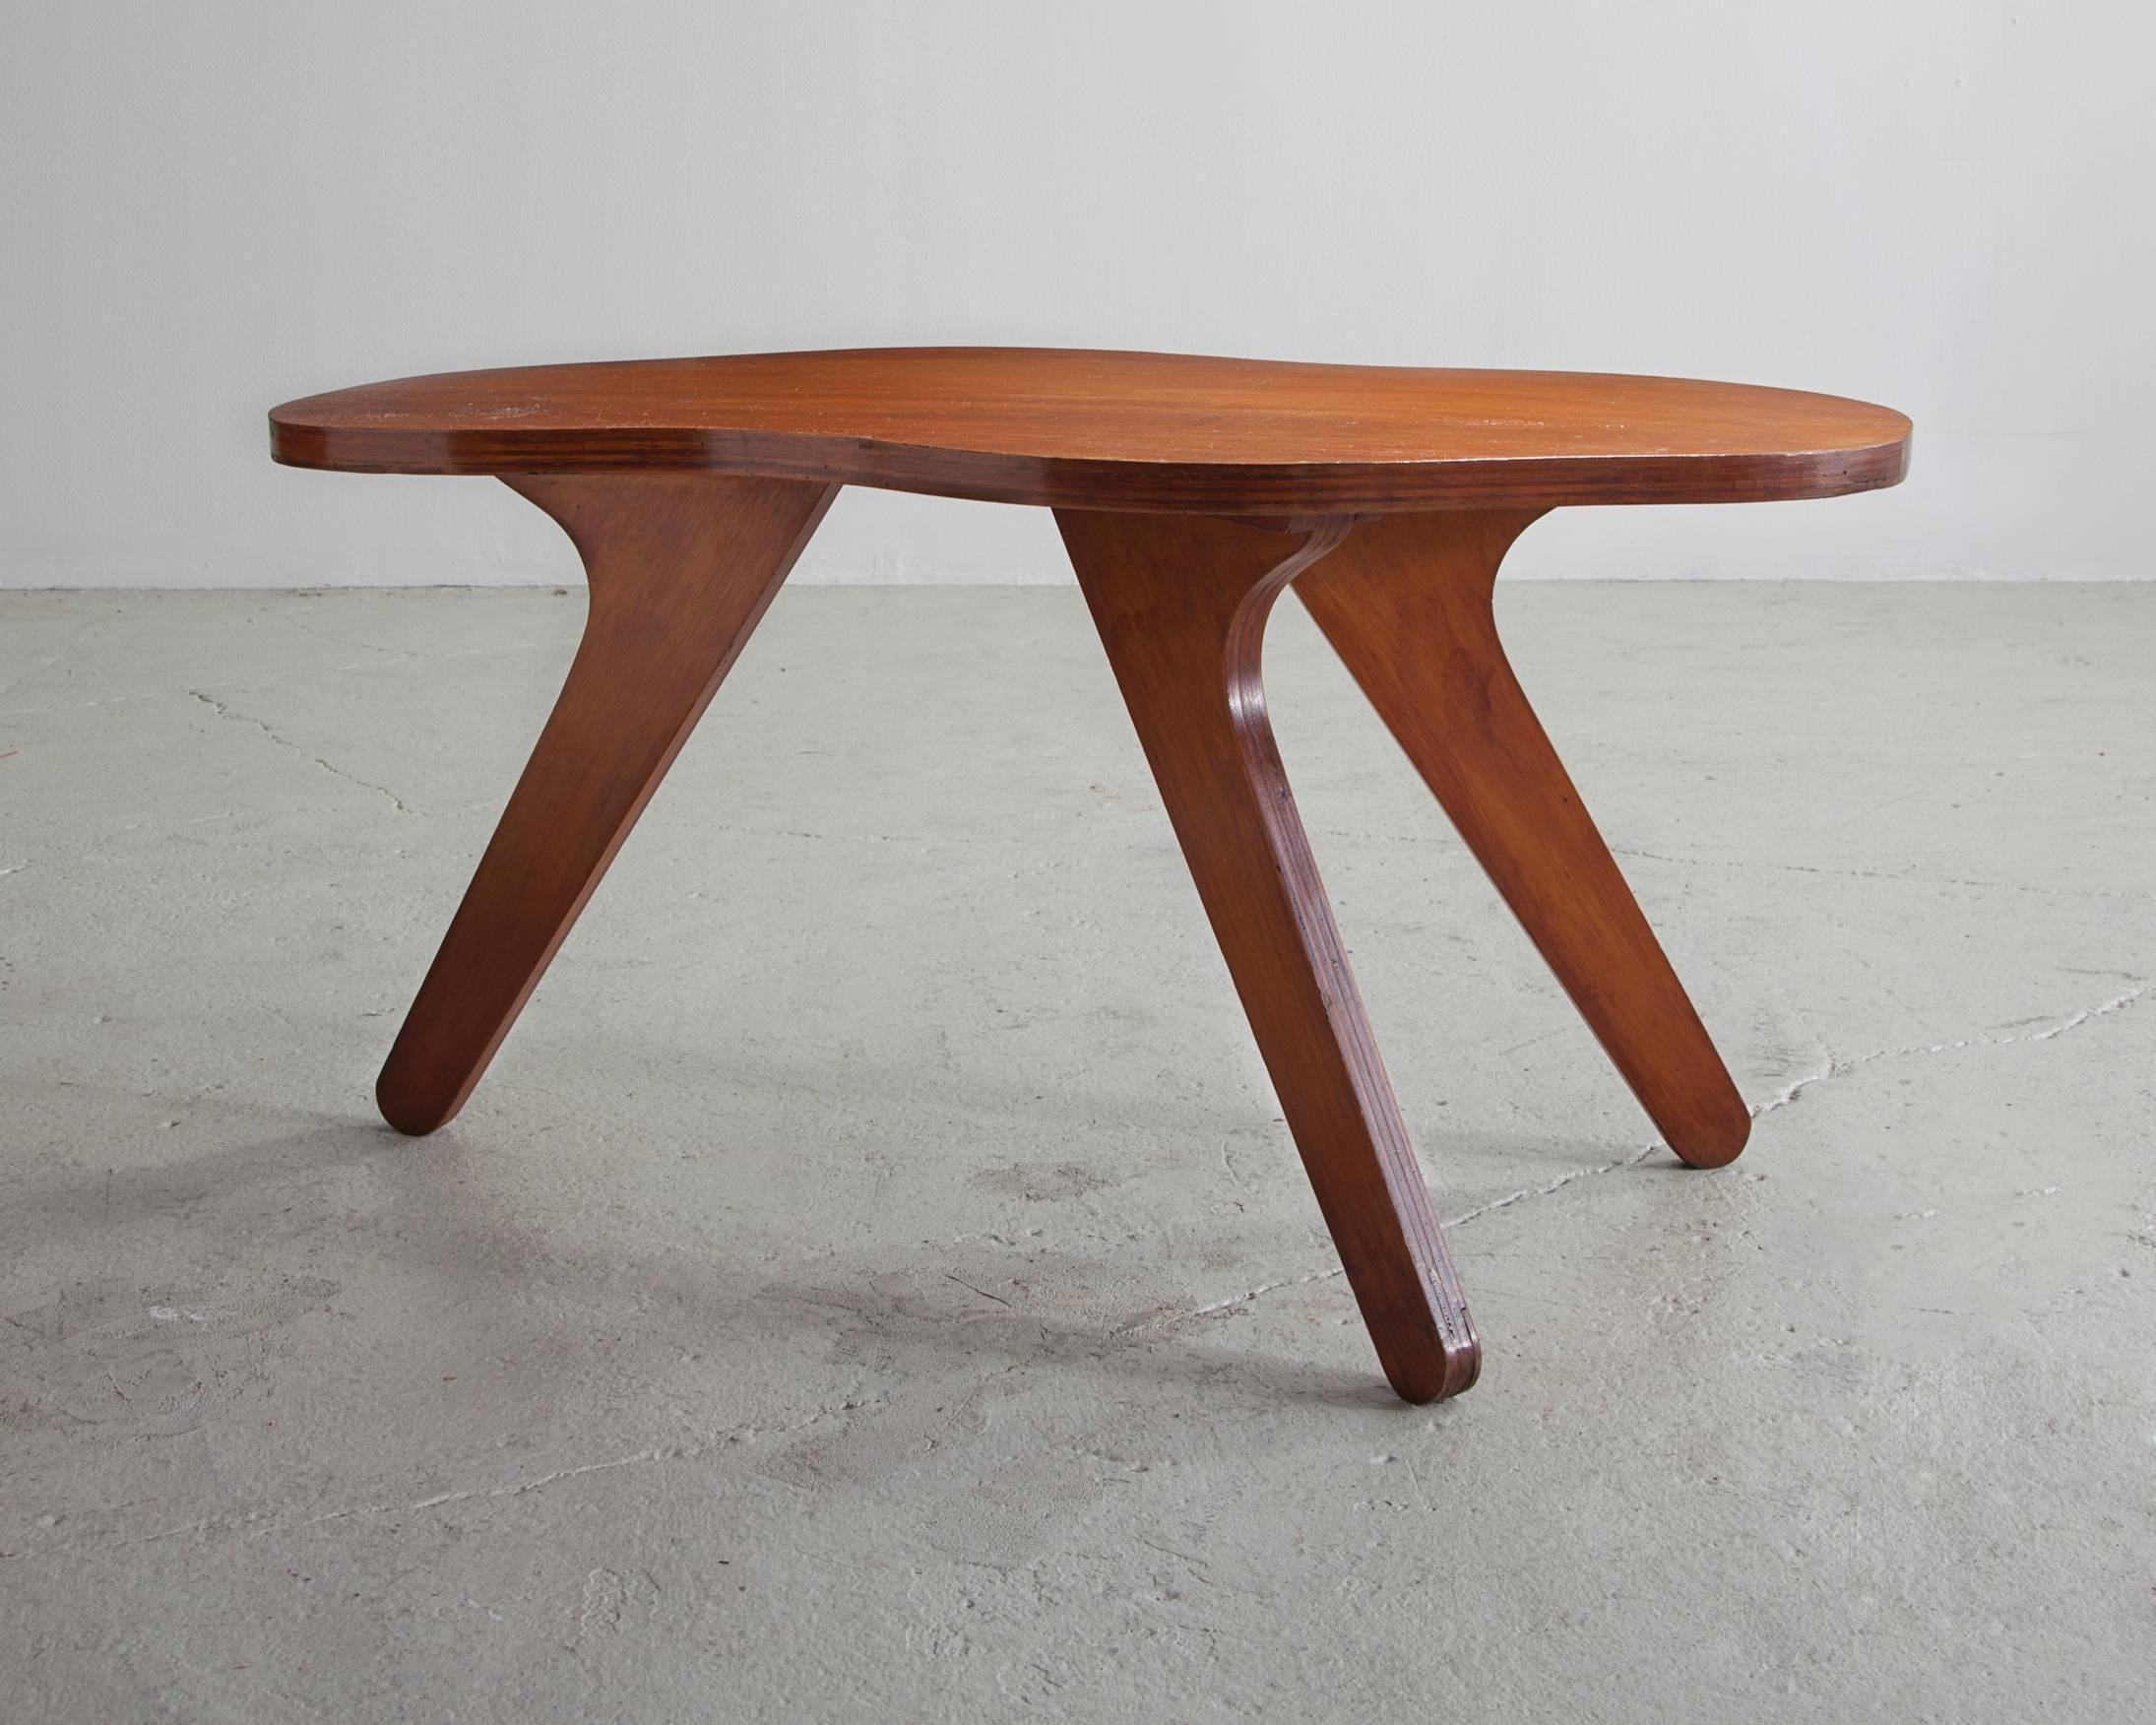 Organically shaped side table in plywood. Designed by Jose Zanine (1918-2001) for Z. Moveis Brazil, 1950s.